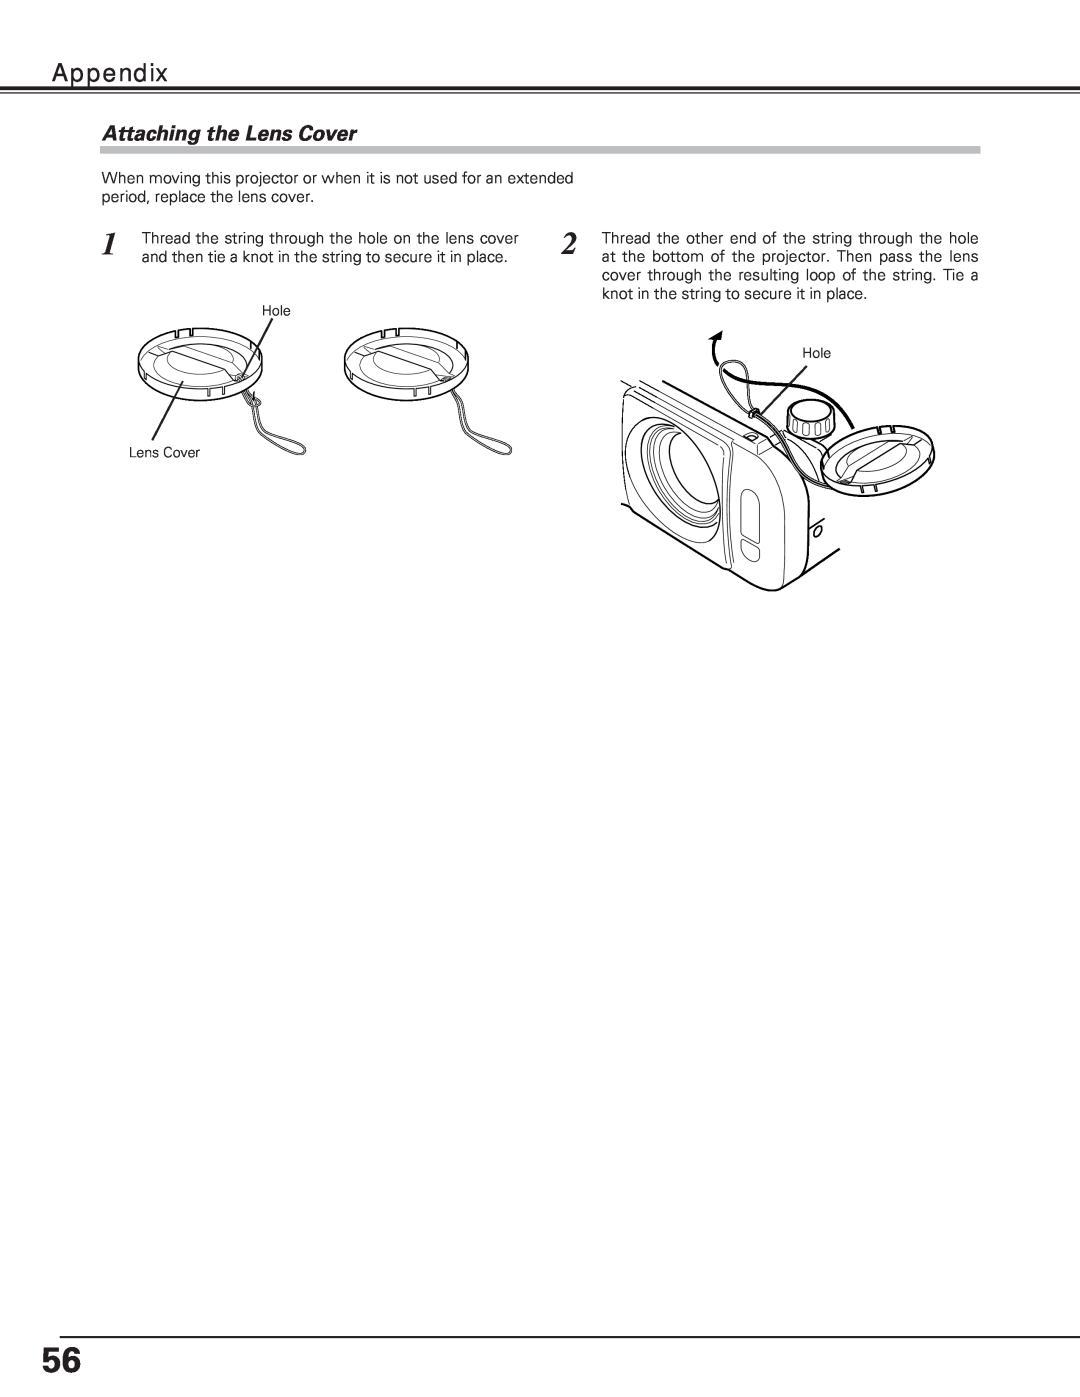 Eiki LC-XE10 instruction manual Attaching the Lens Cover, Appendix, Hole Lens Cover 